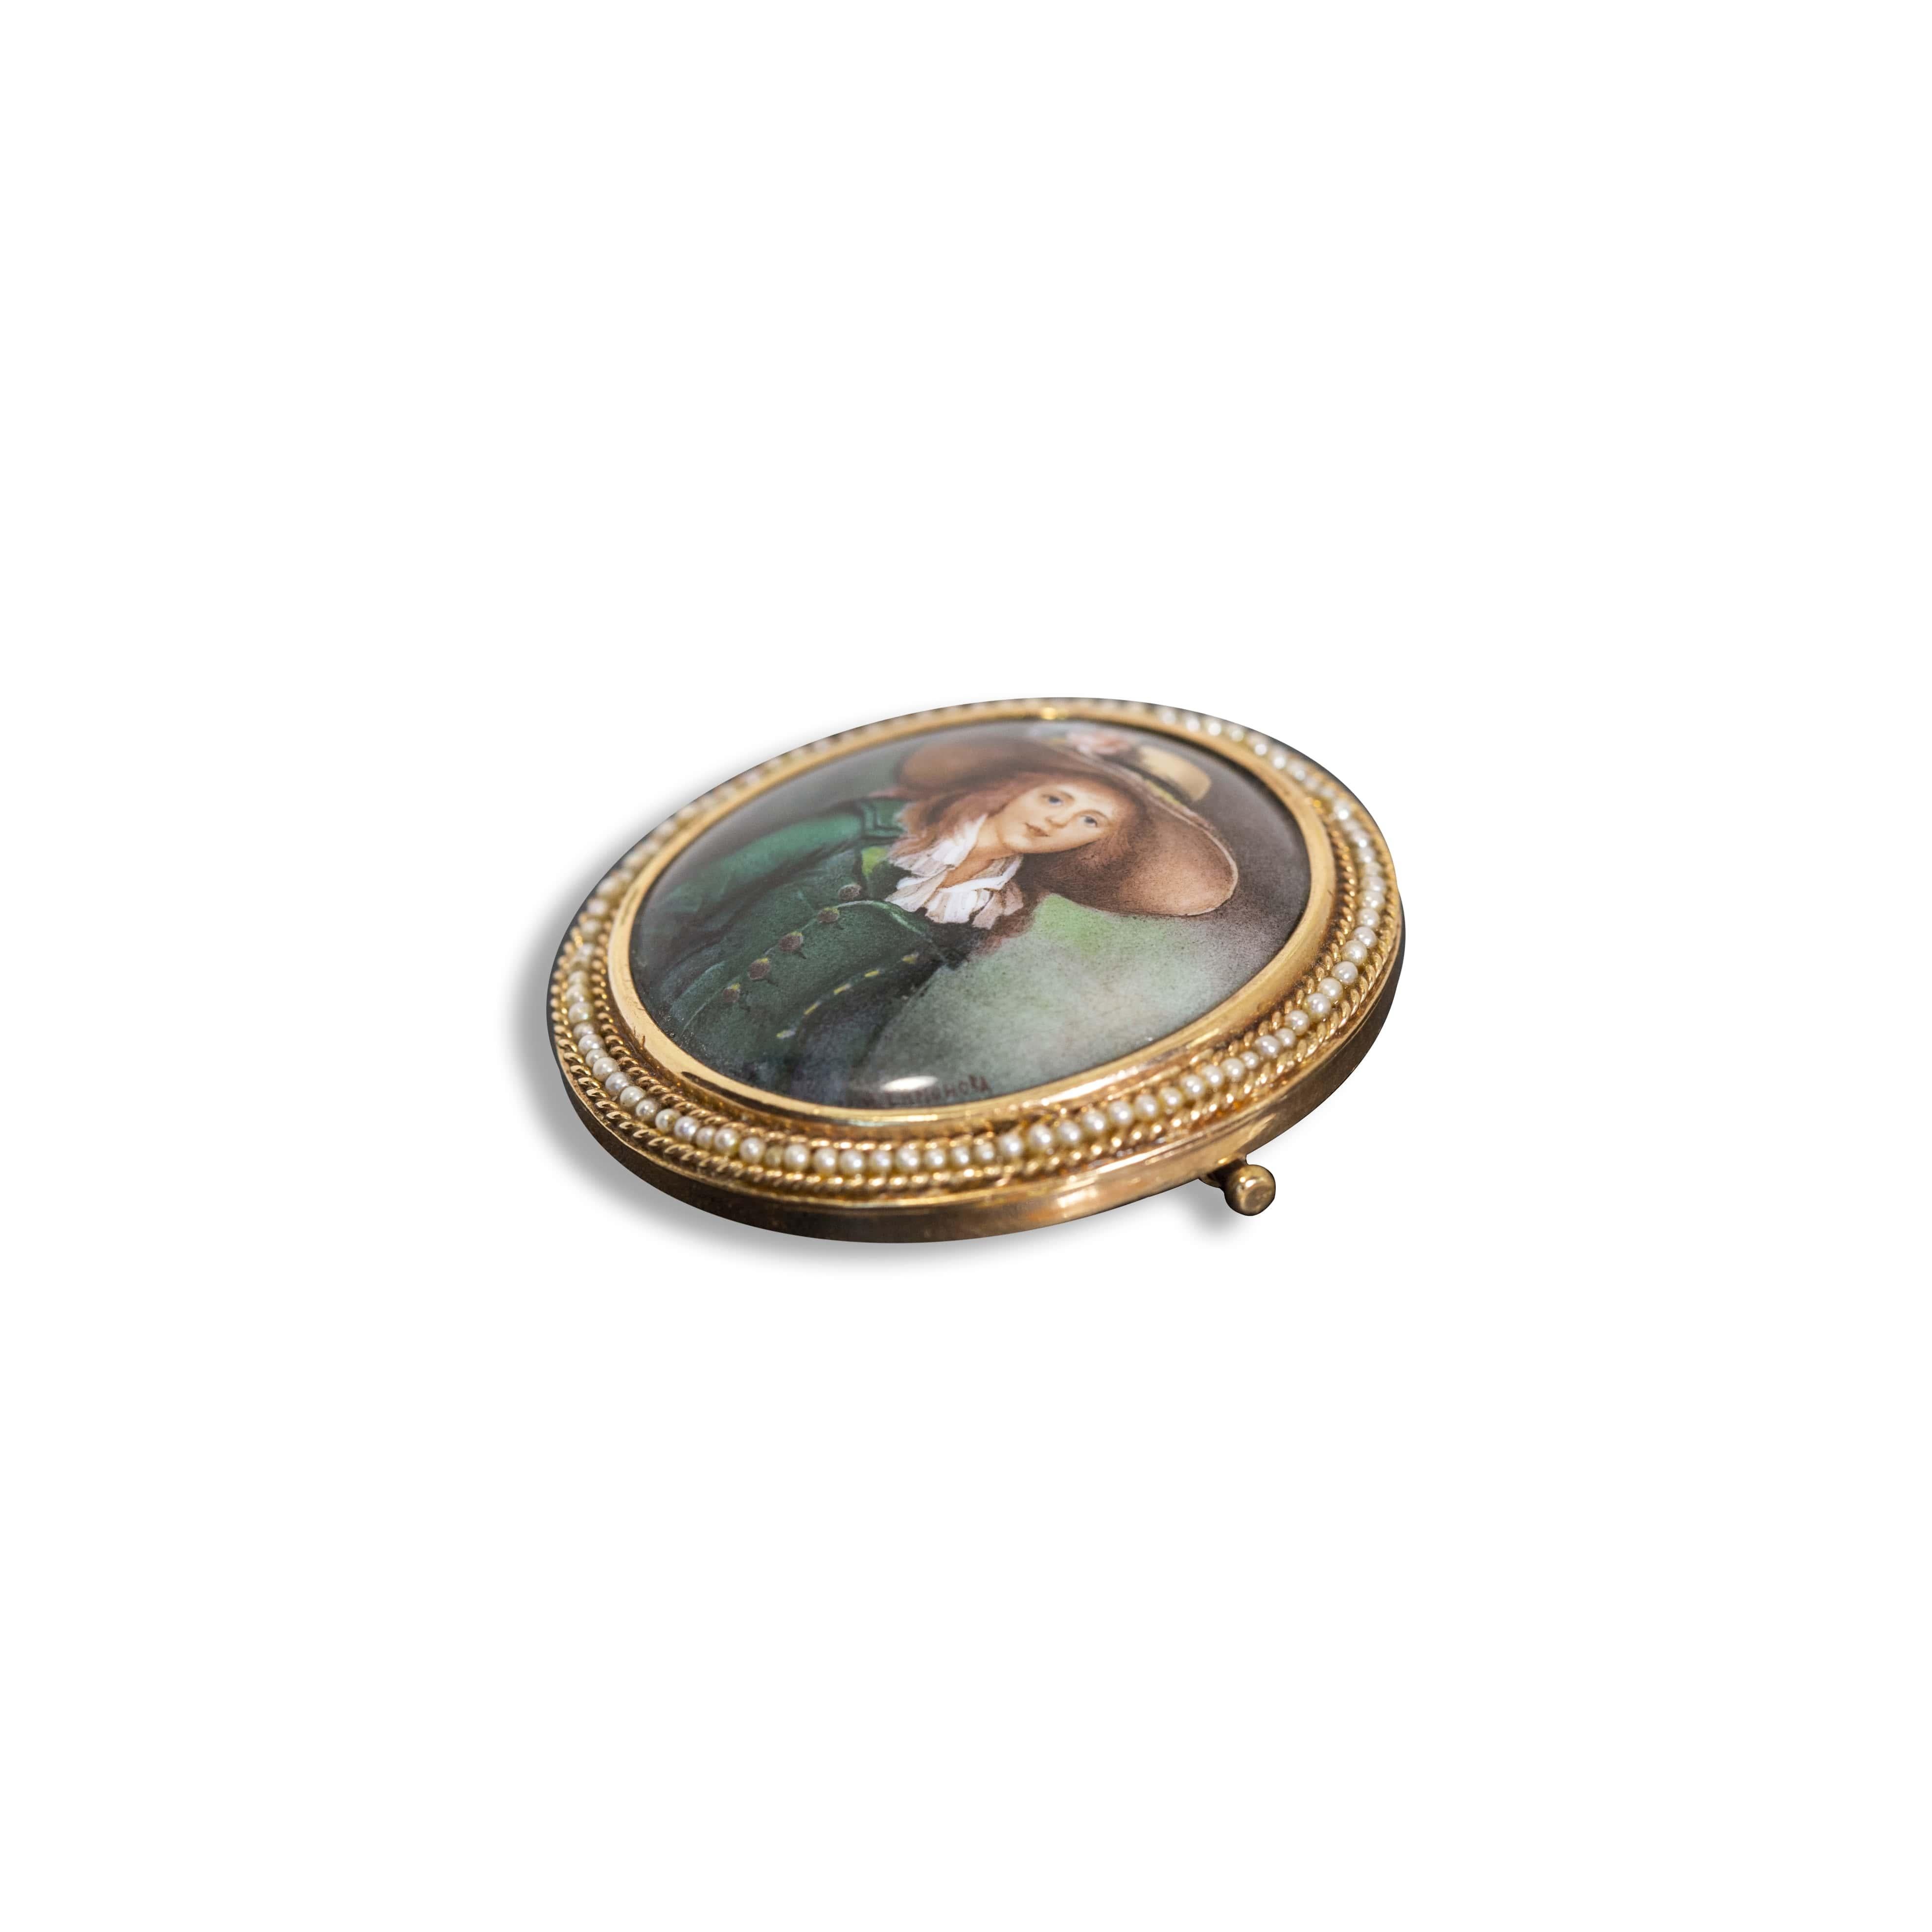 Swiss Enamel Miniature Portrait Painting in 14 Karat Gold with Seed Pearls In Good Condition For Sale In Houston, TX